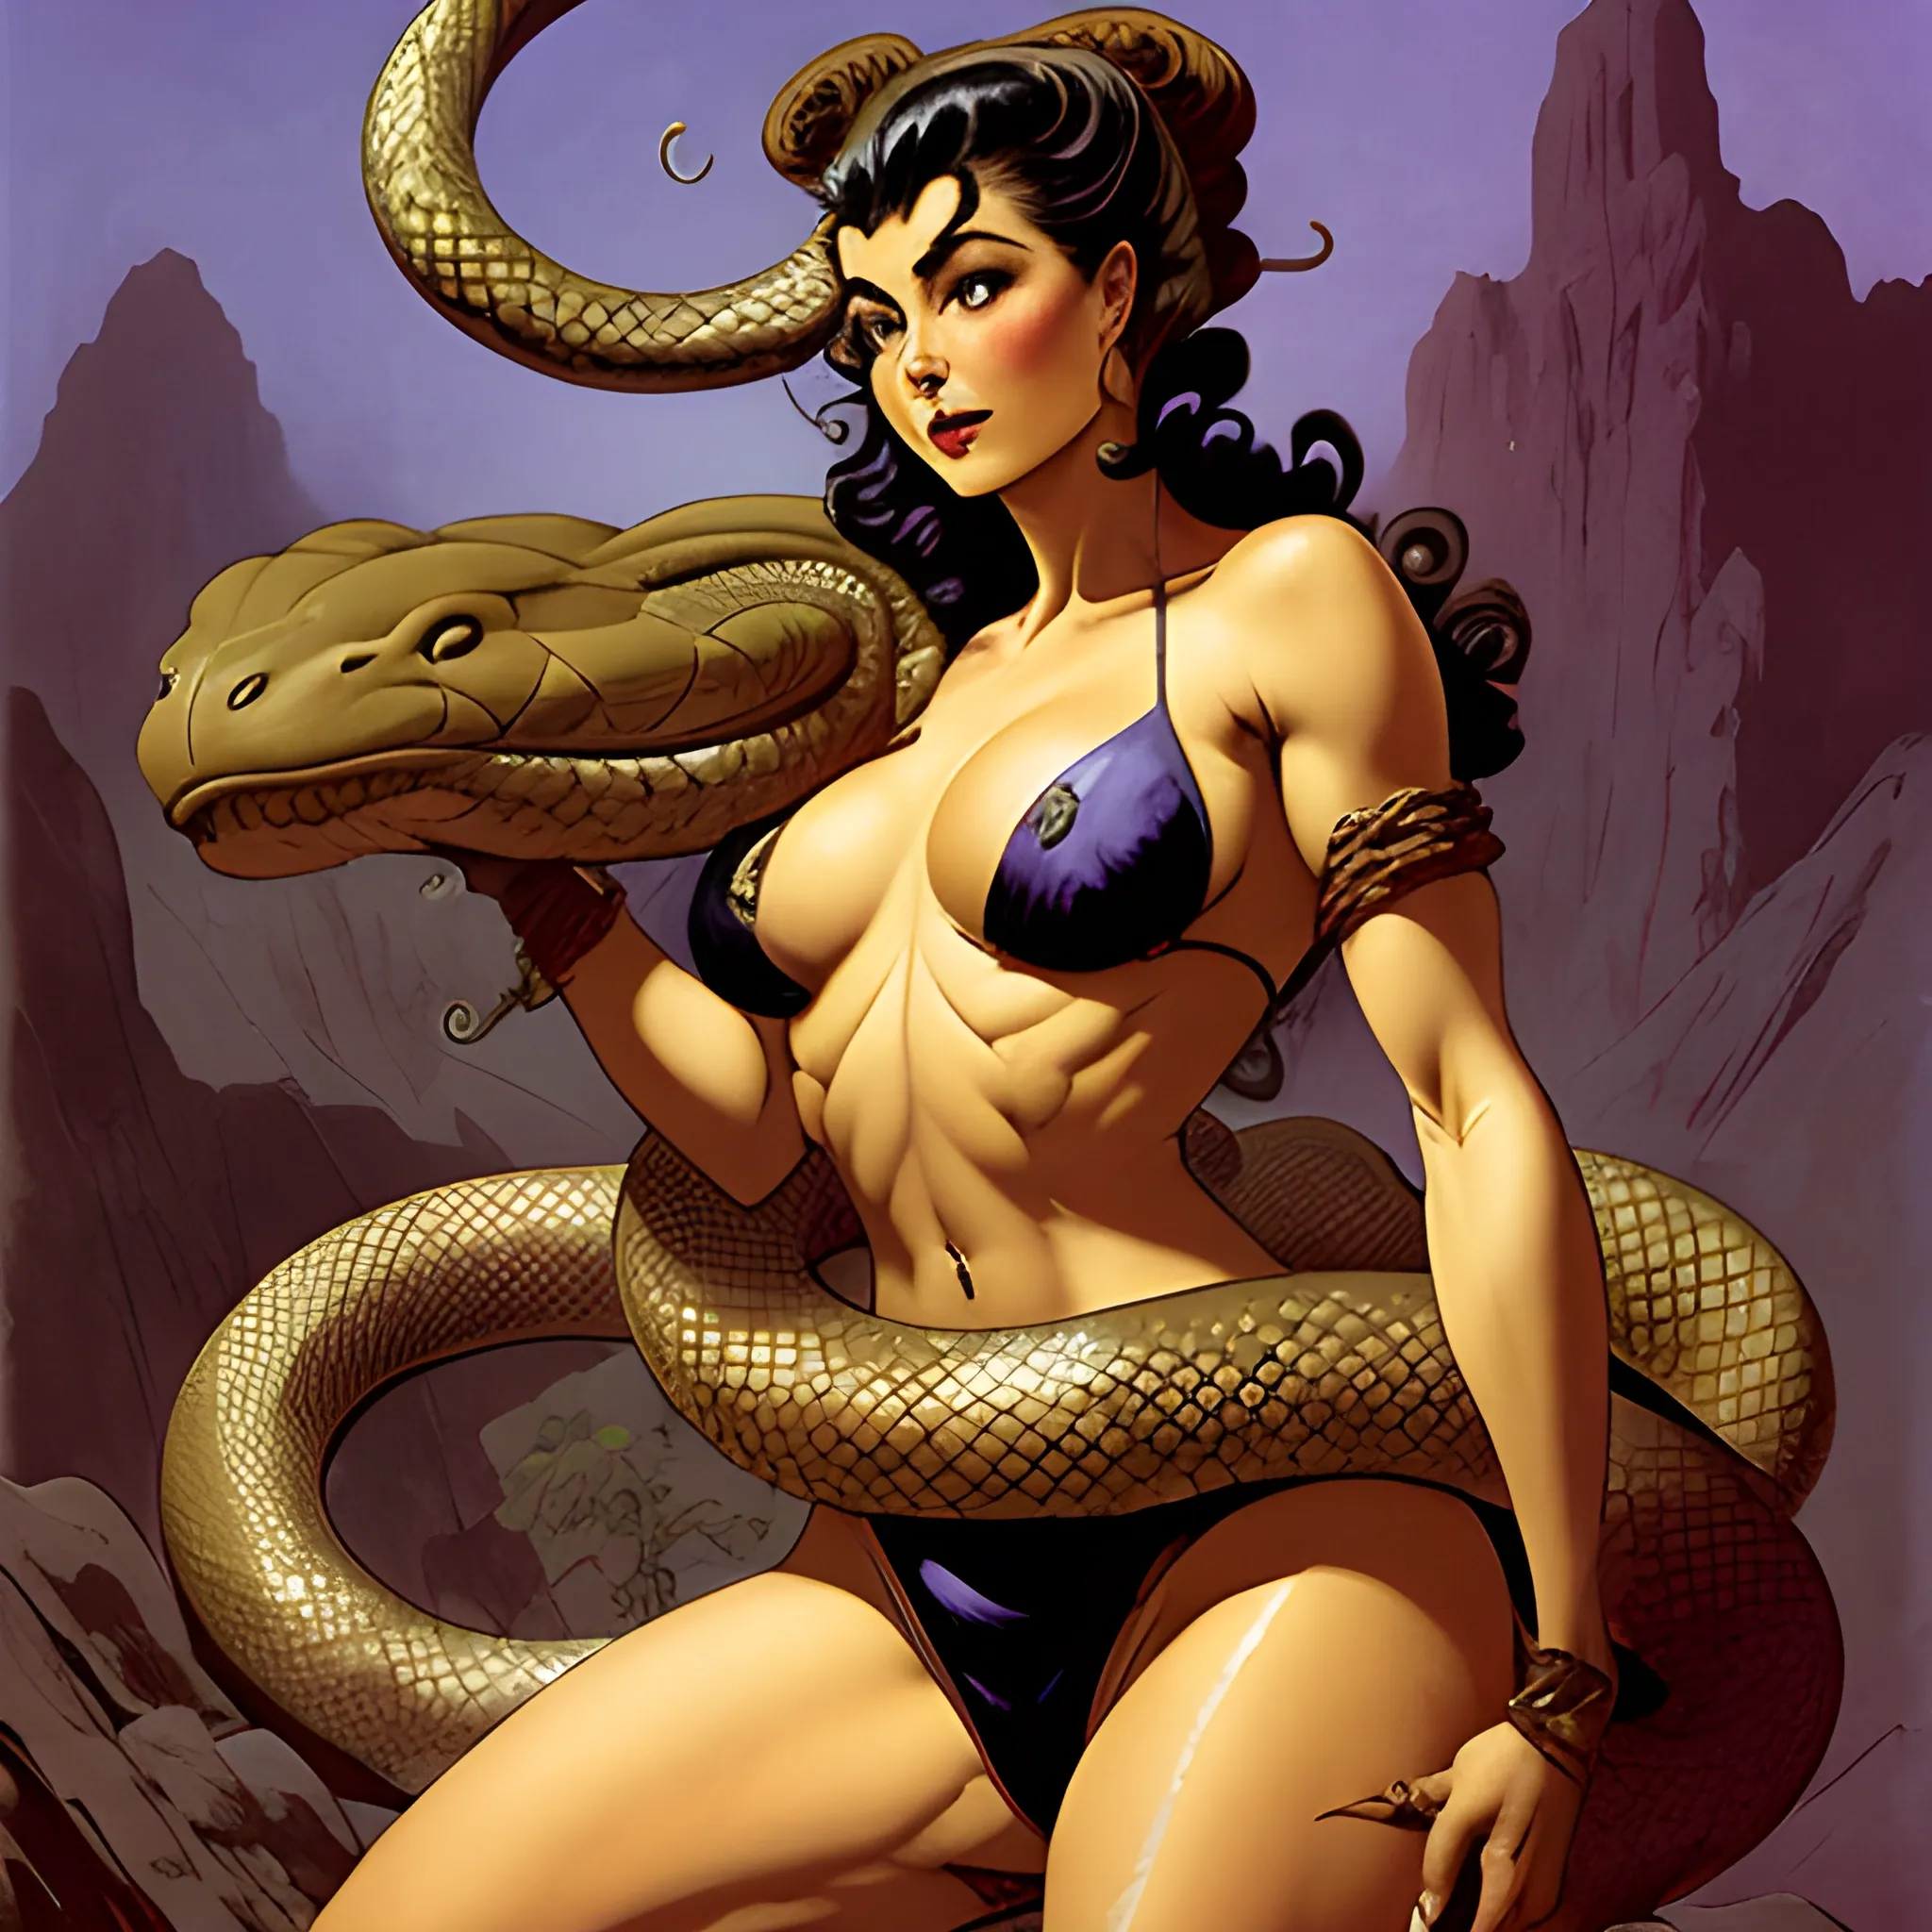 Frazetta style woman wrapped up in giant snake coils
